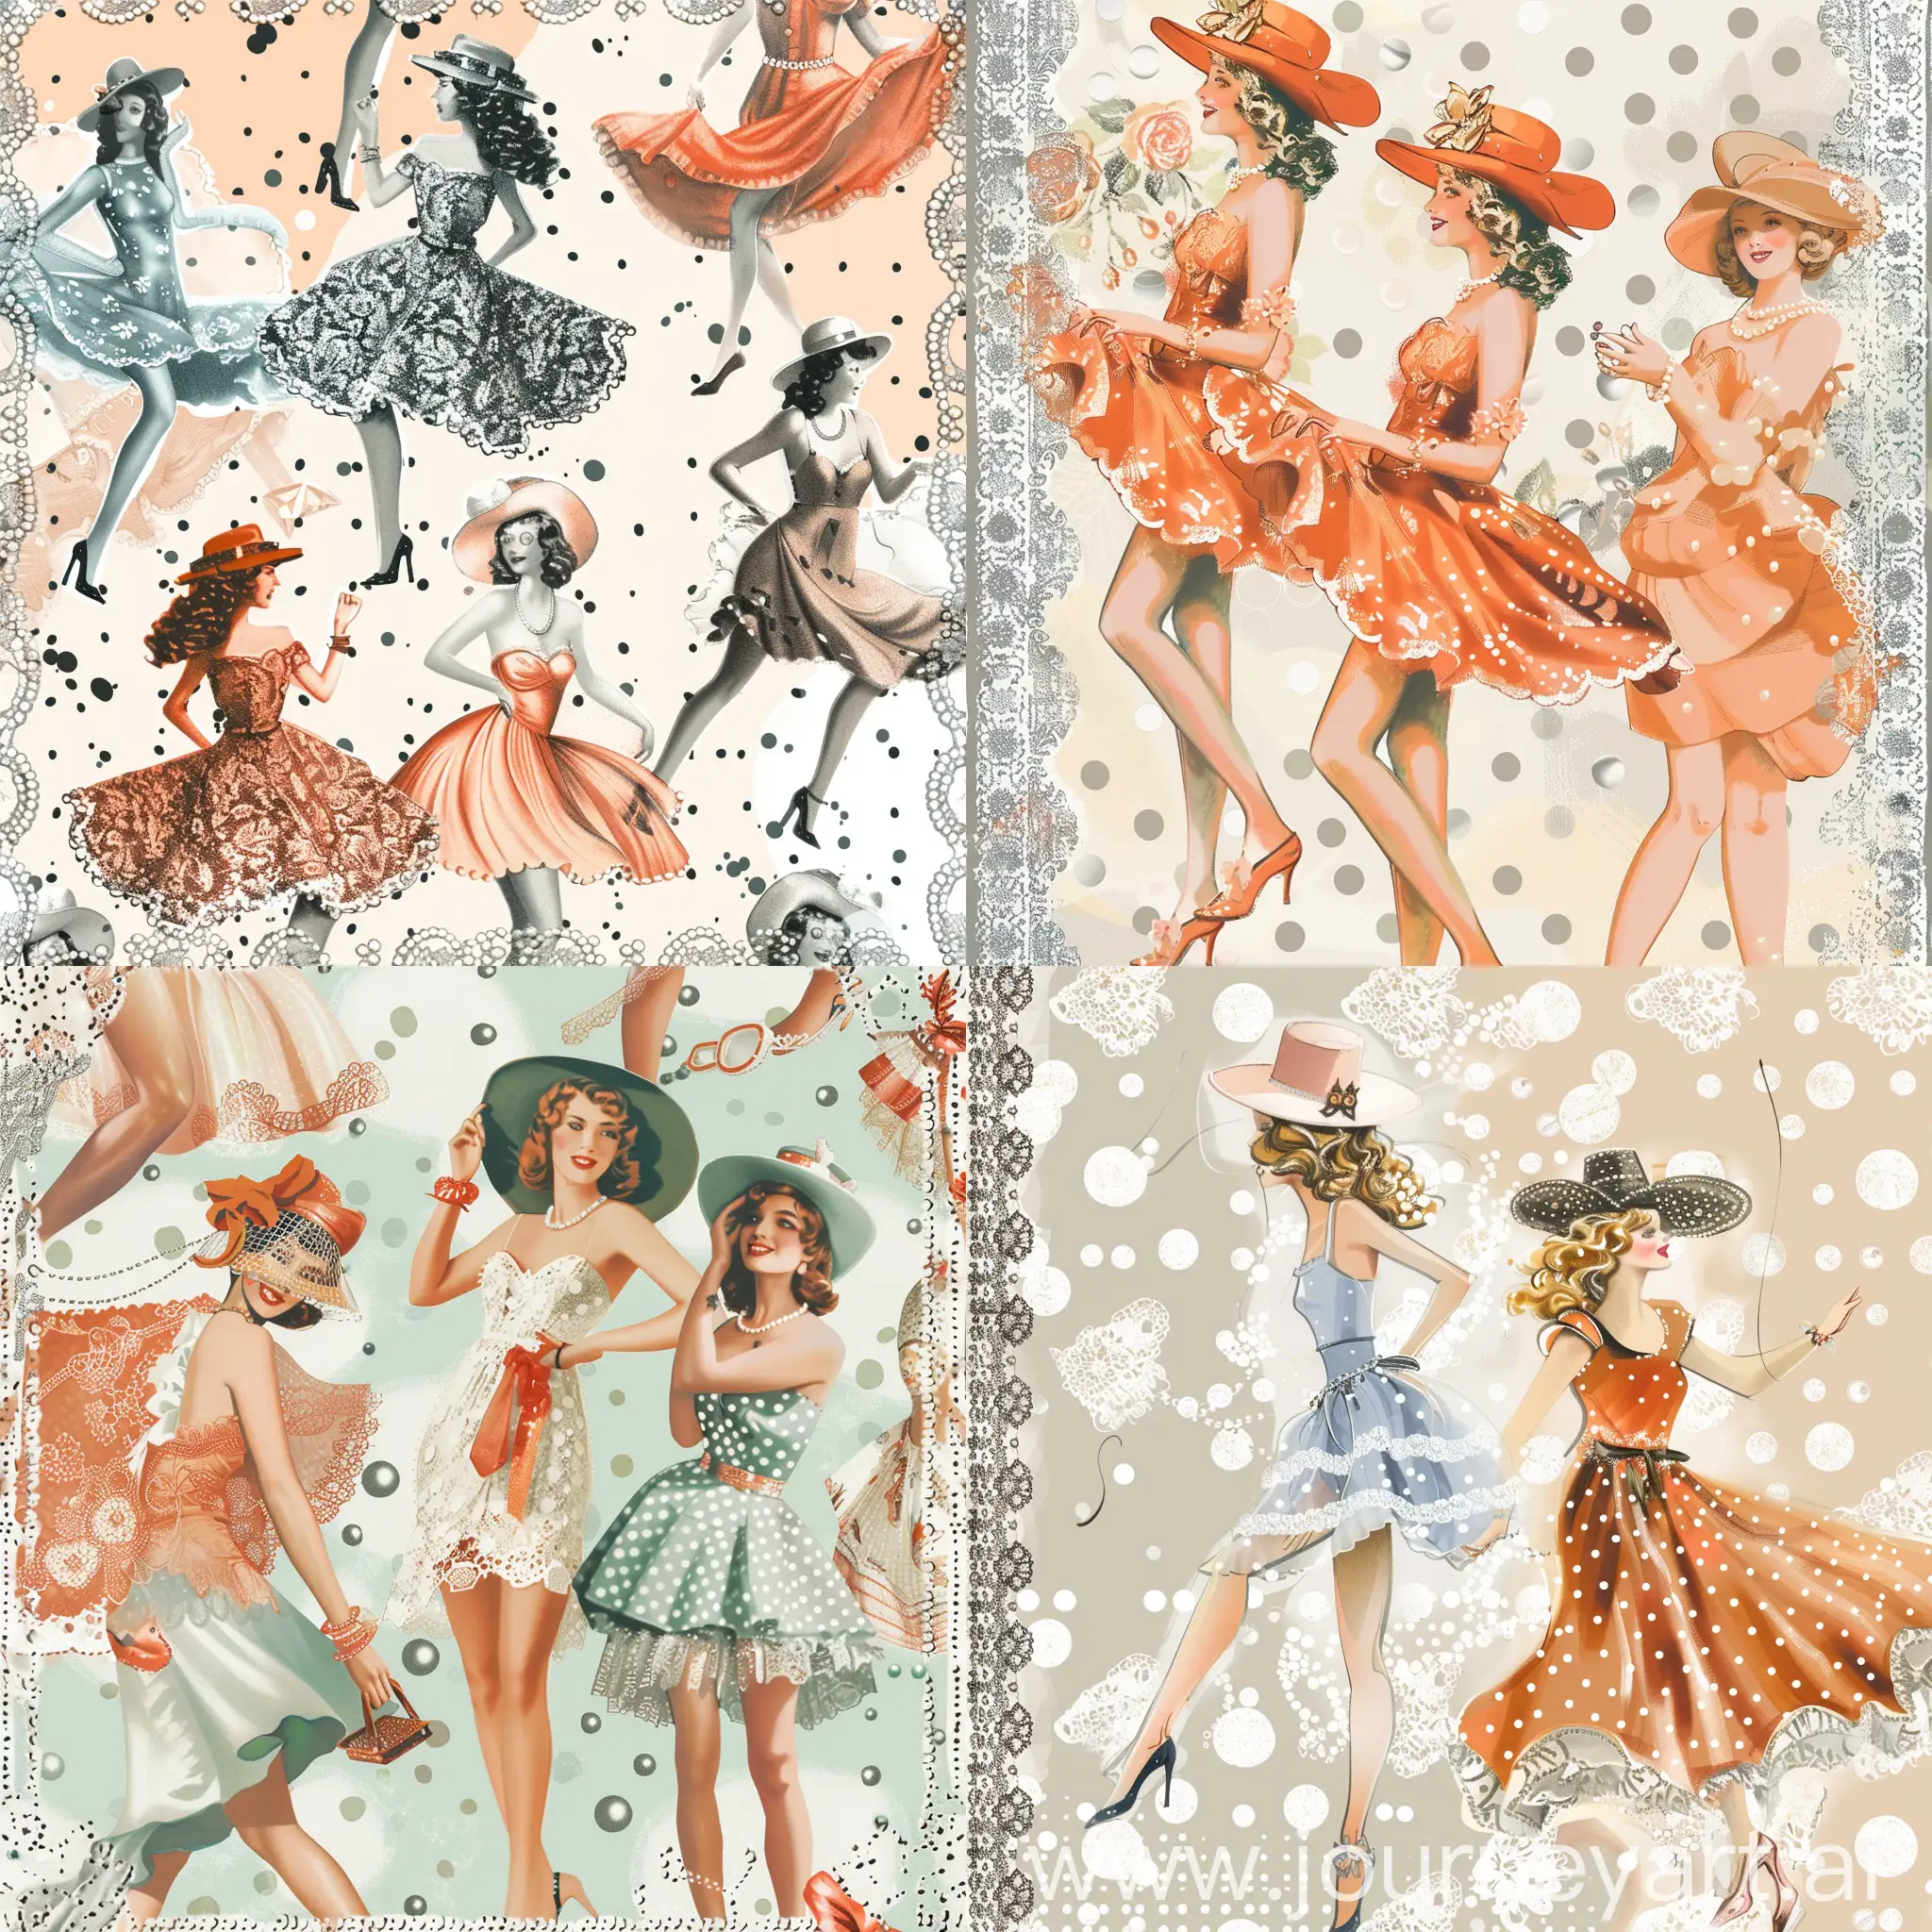 vintage-inspired background featuring retro fashion elements like lace, pearls, and polka dots. Overlay the background with Coquette-style illustrations of glamorous women in retro dresses and hats, striking playful poses.